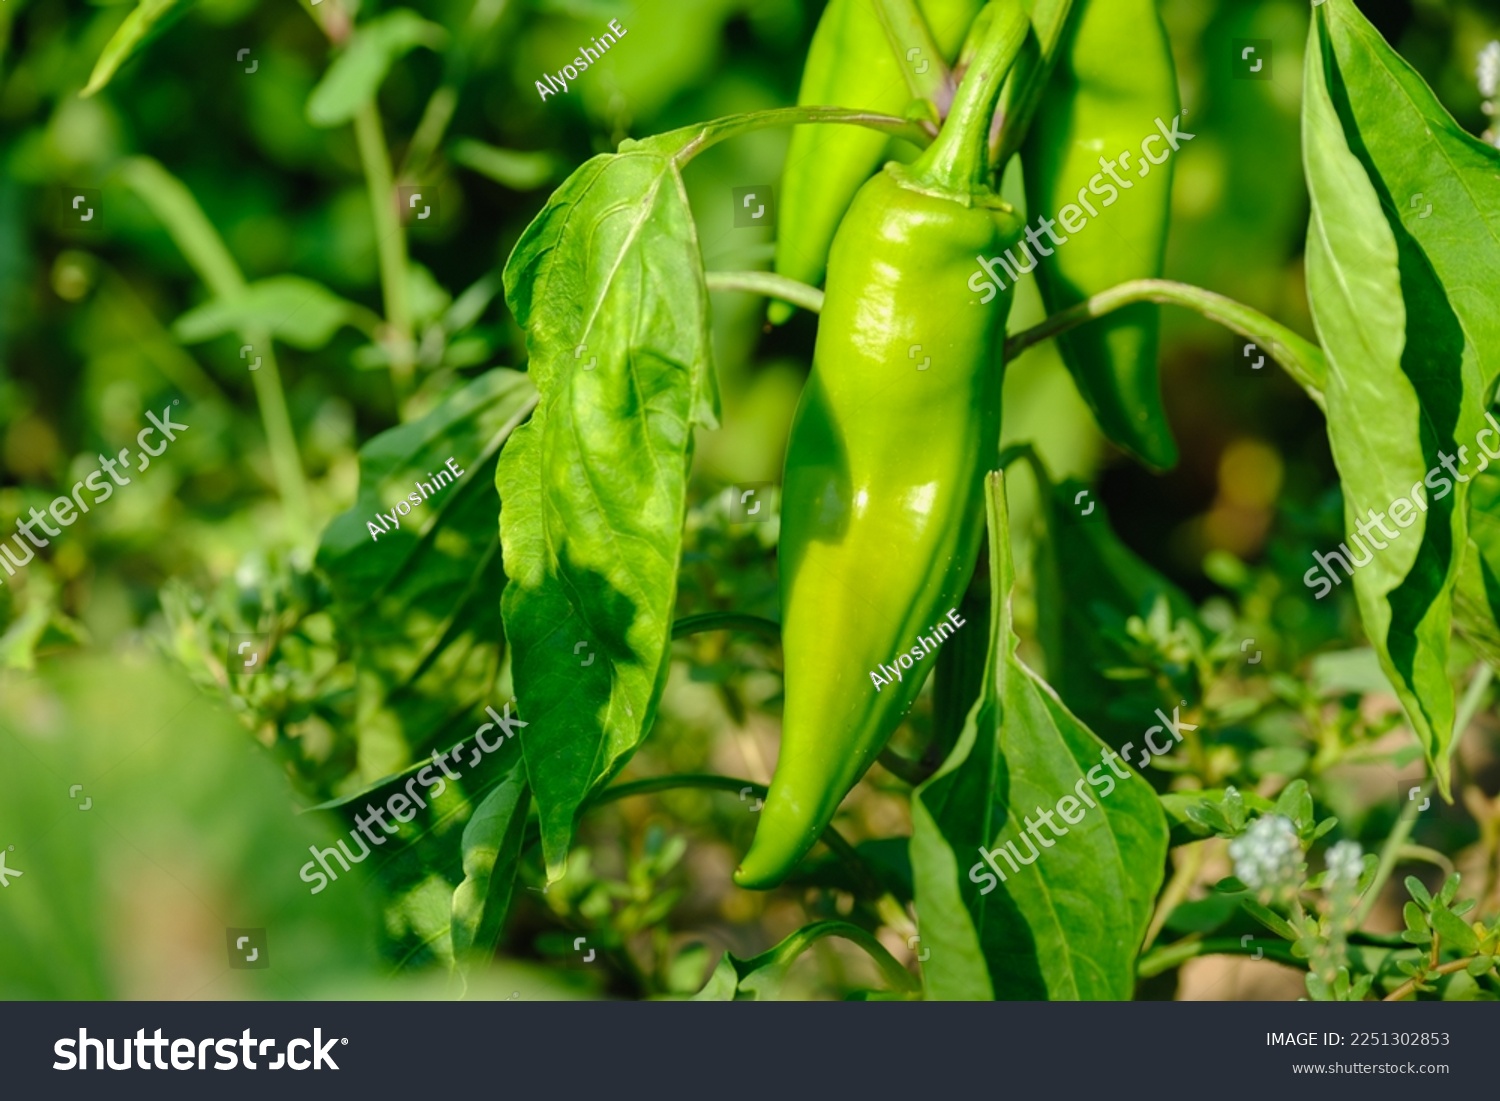 Green peppers growing in the garden. Green bell pepper hanging on tree in the plantation #2251302853